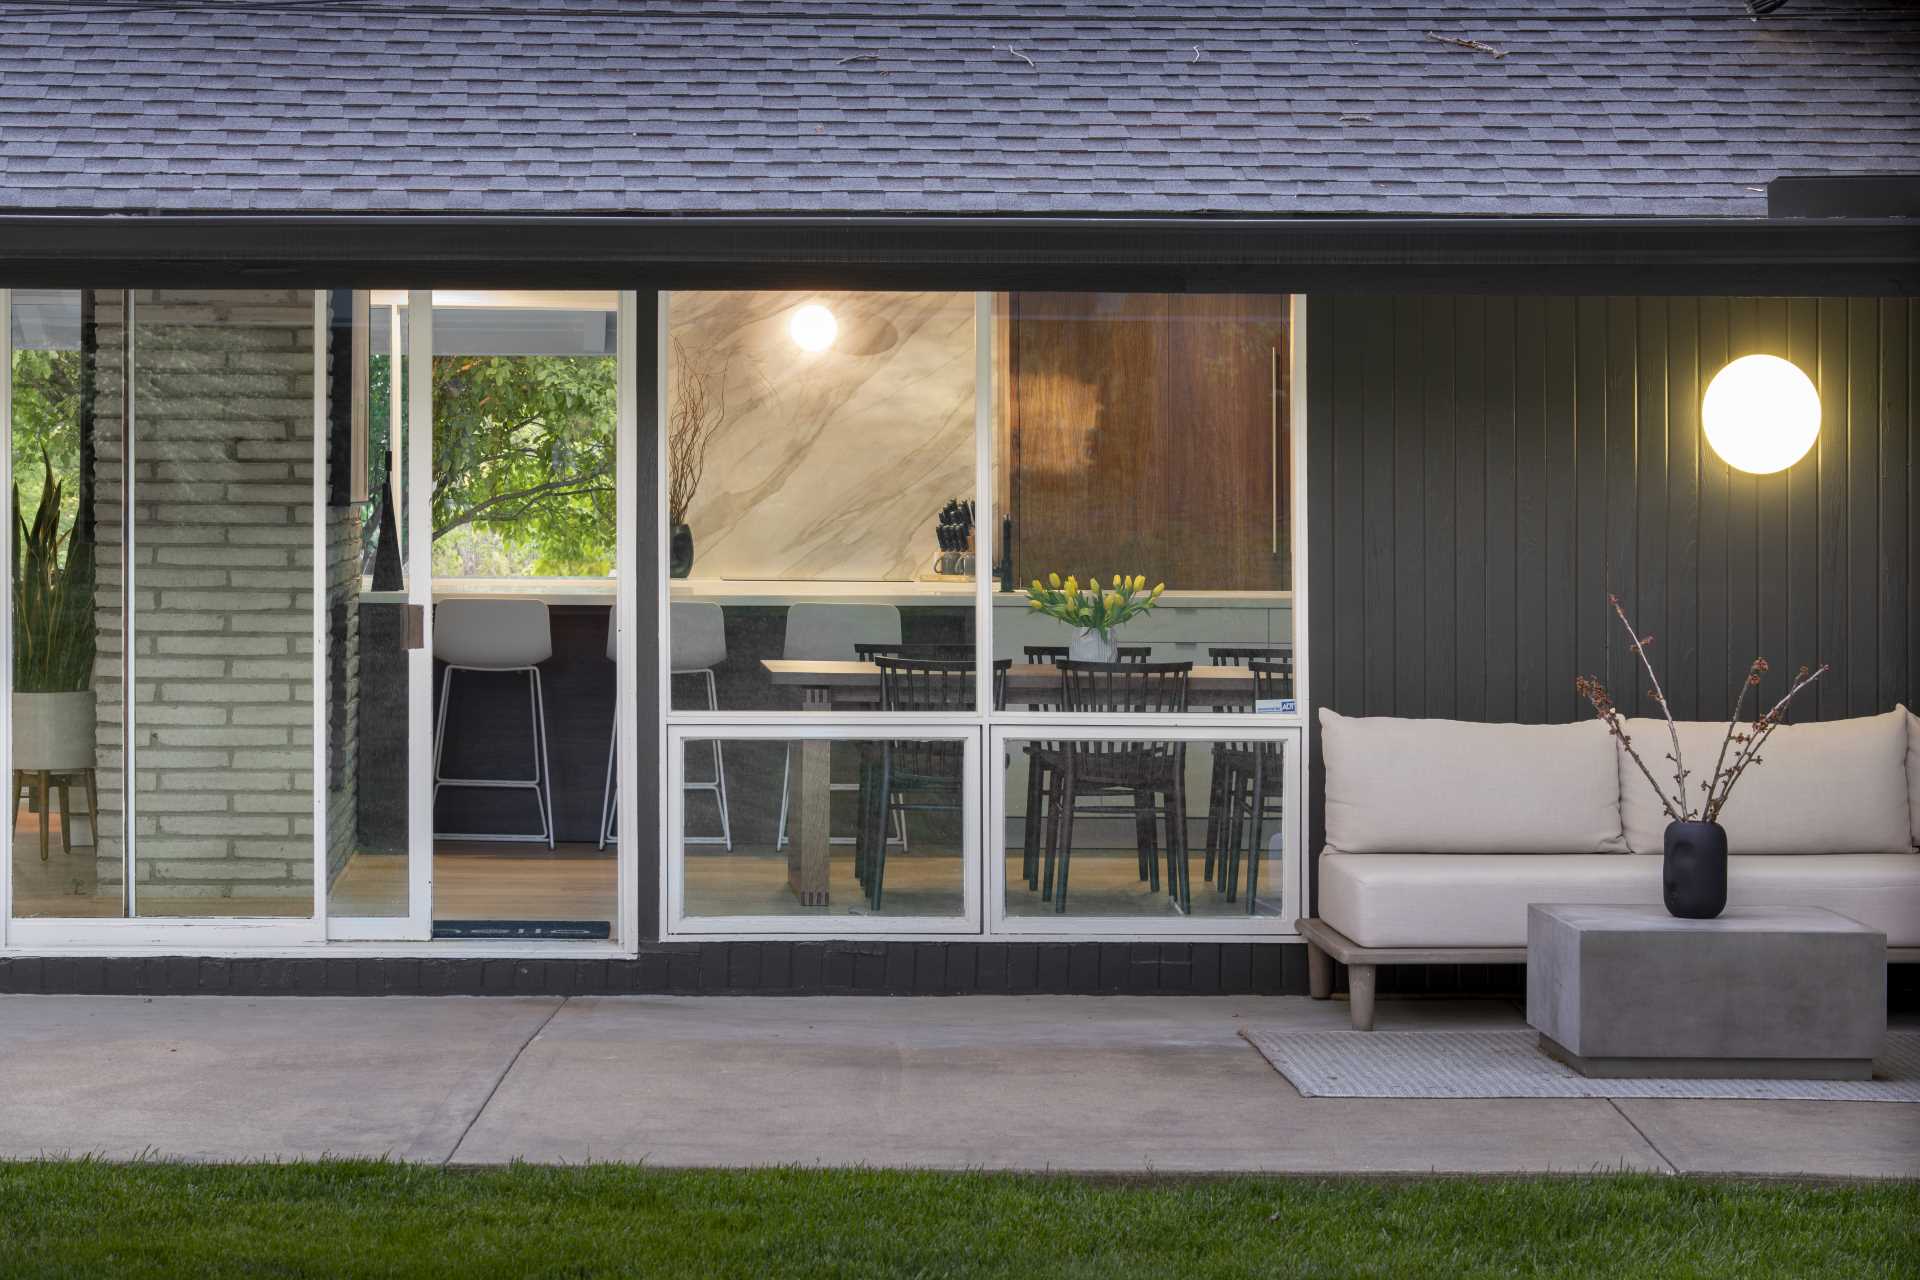 A renovated mid-century modern home with a concrete patio.